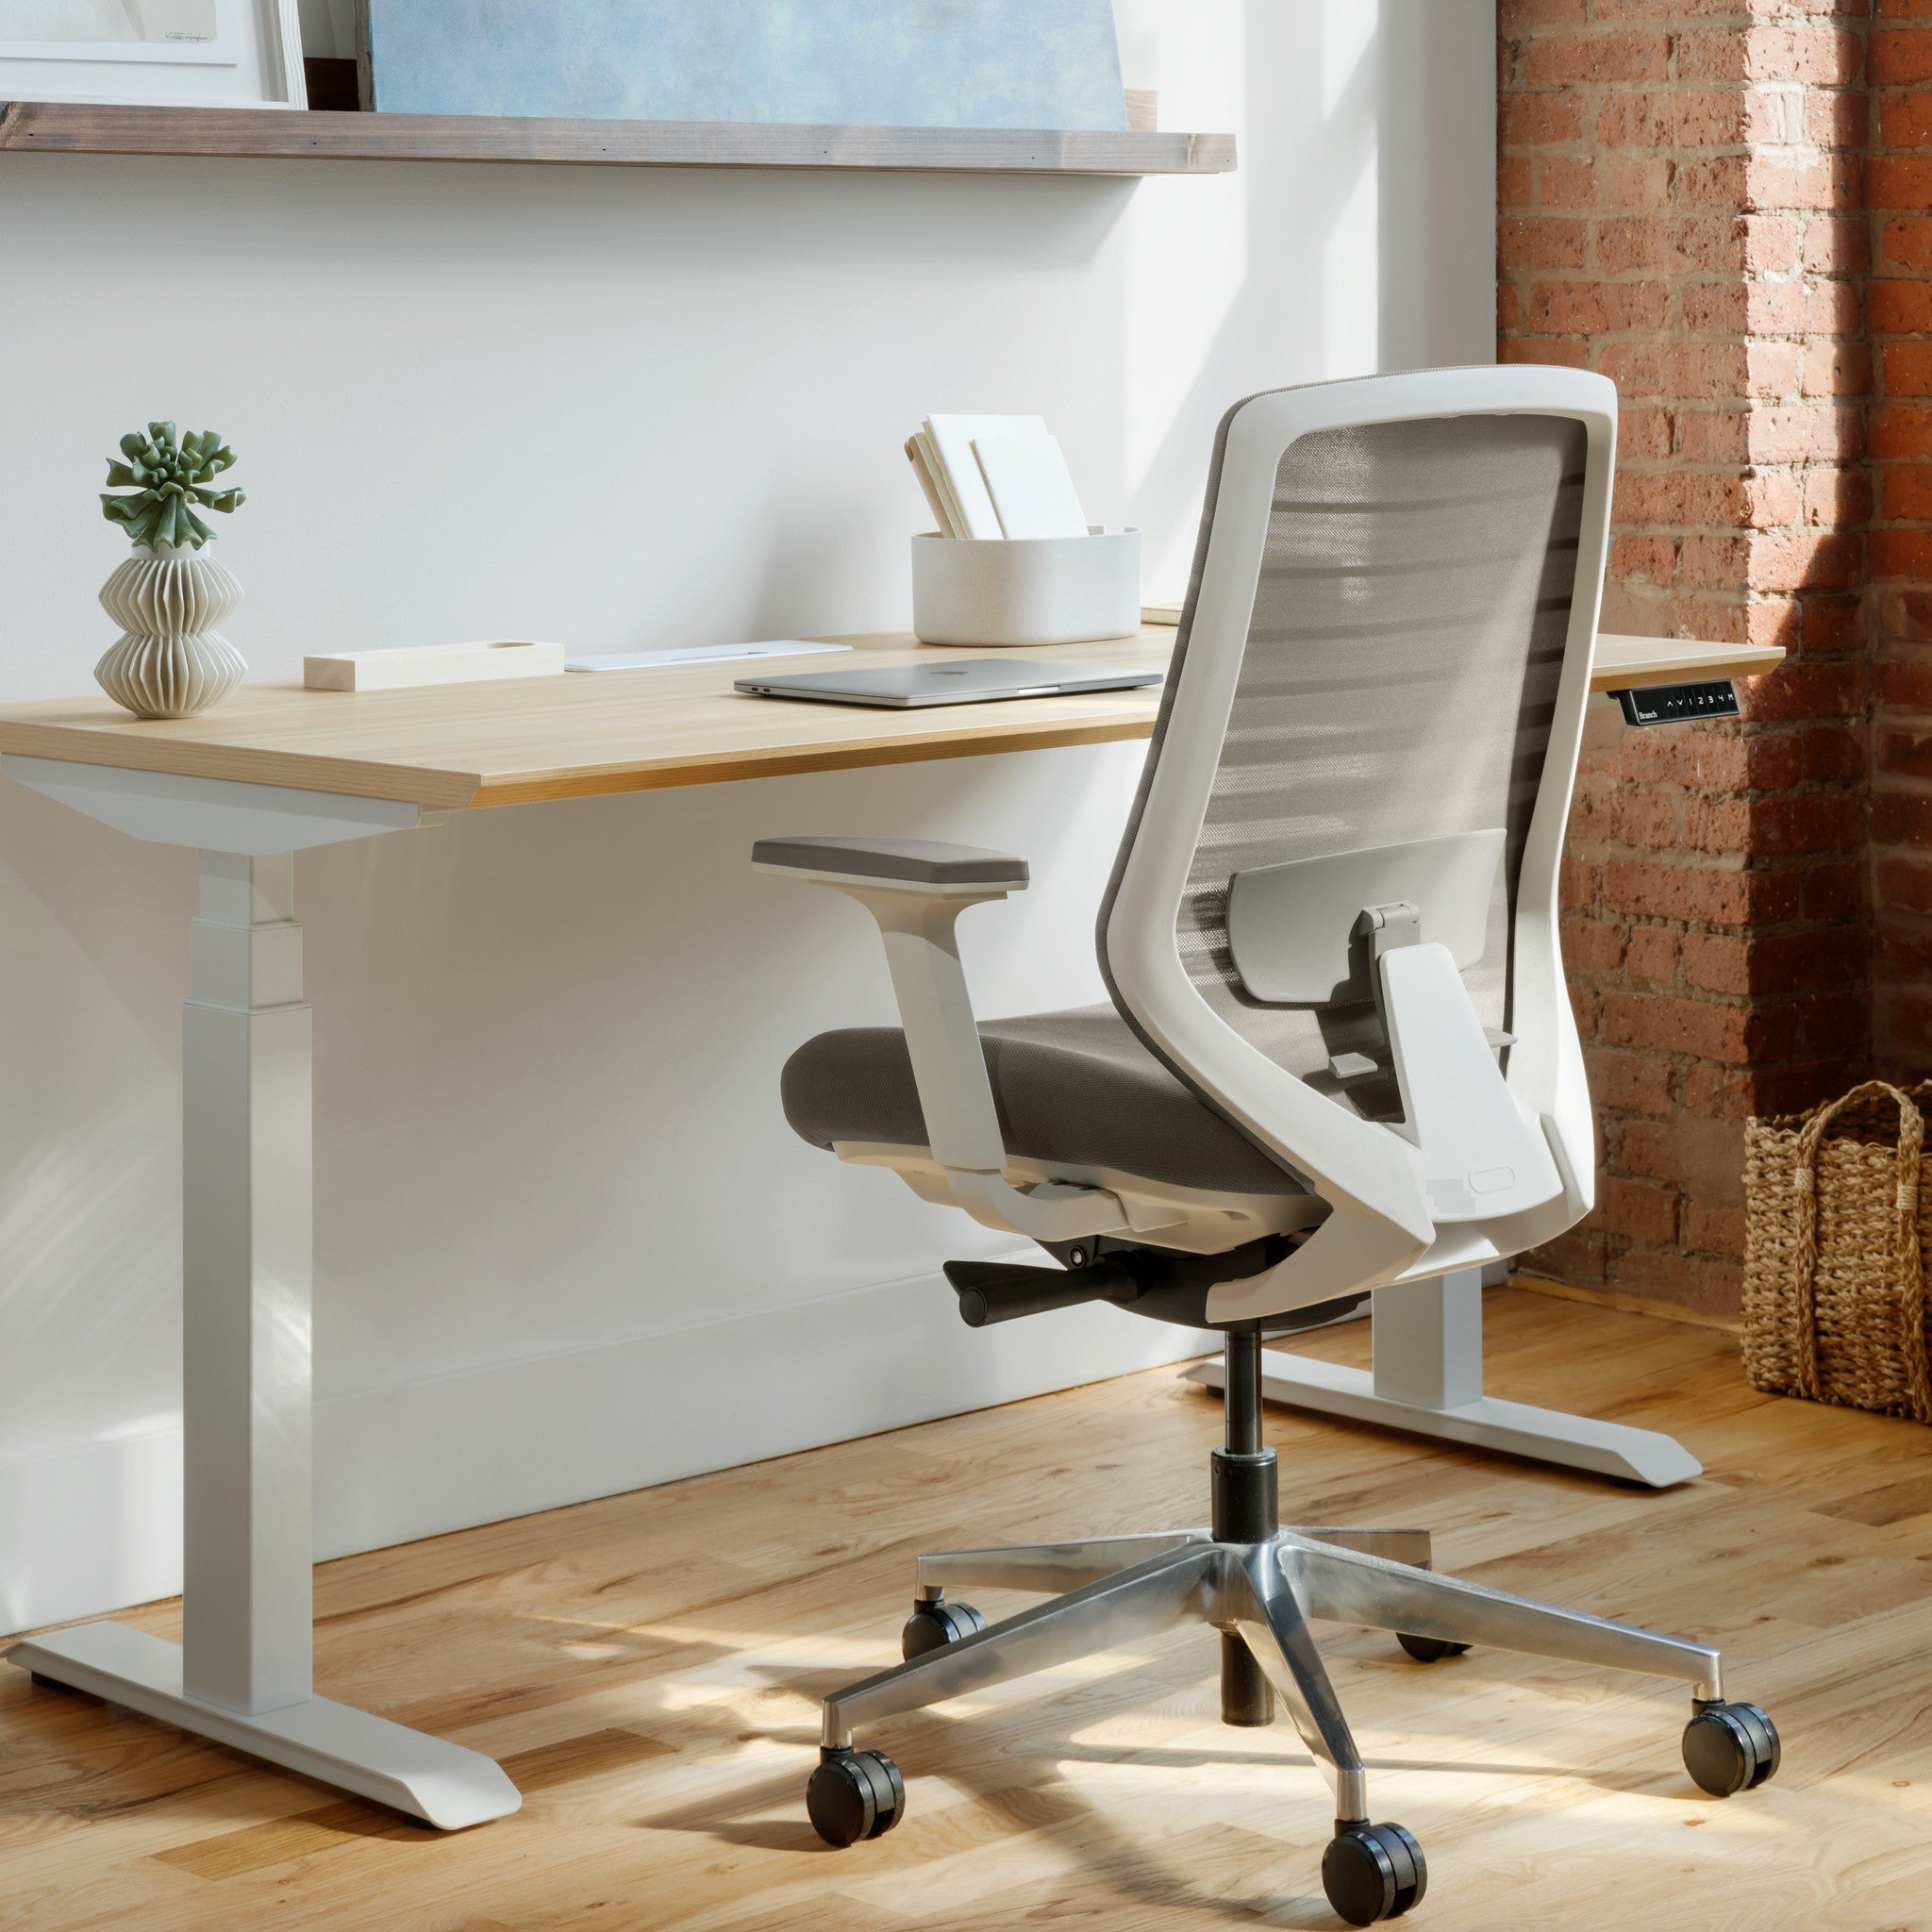 Ergonomic Desk Chairs & Office Chairs